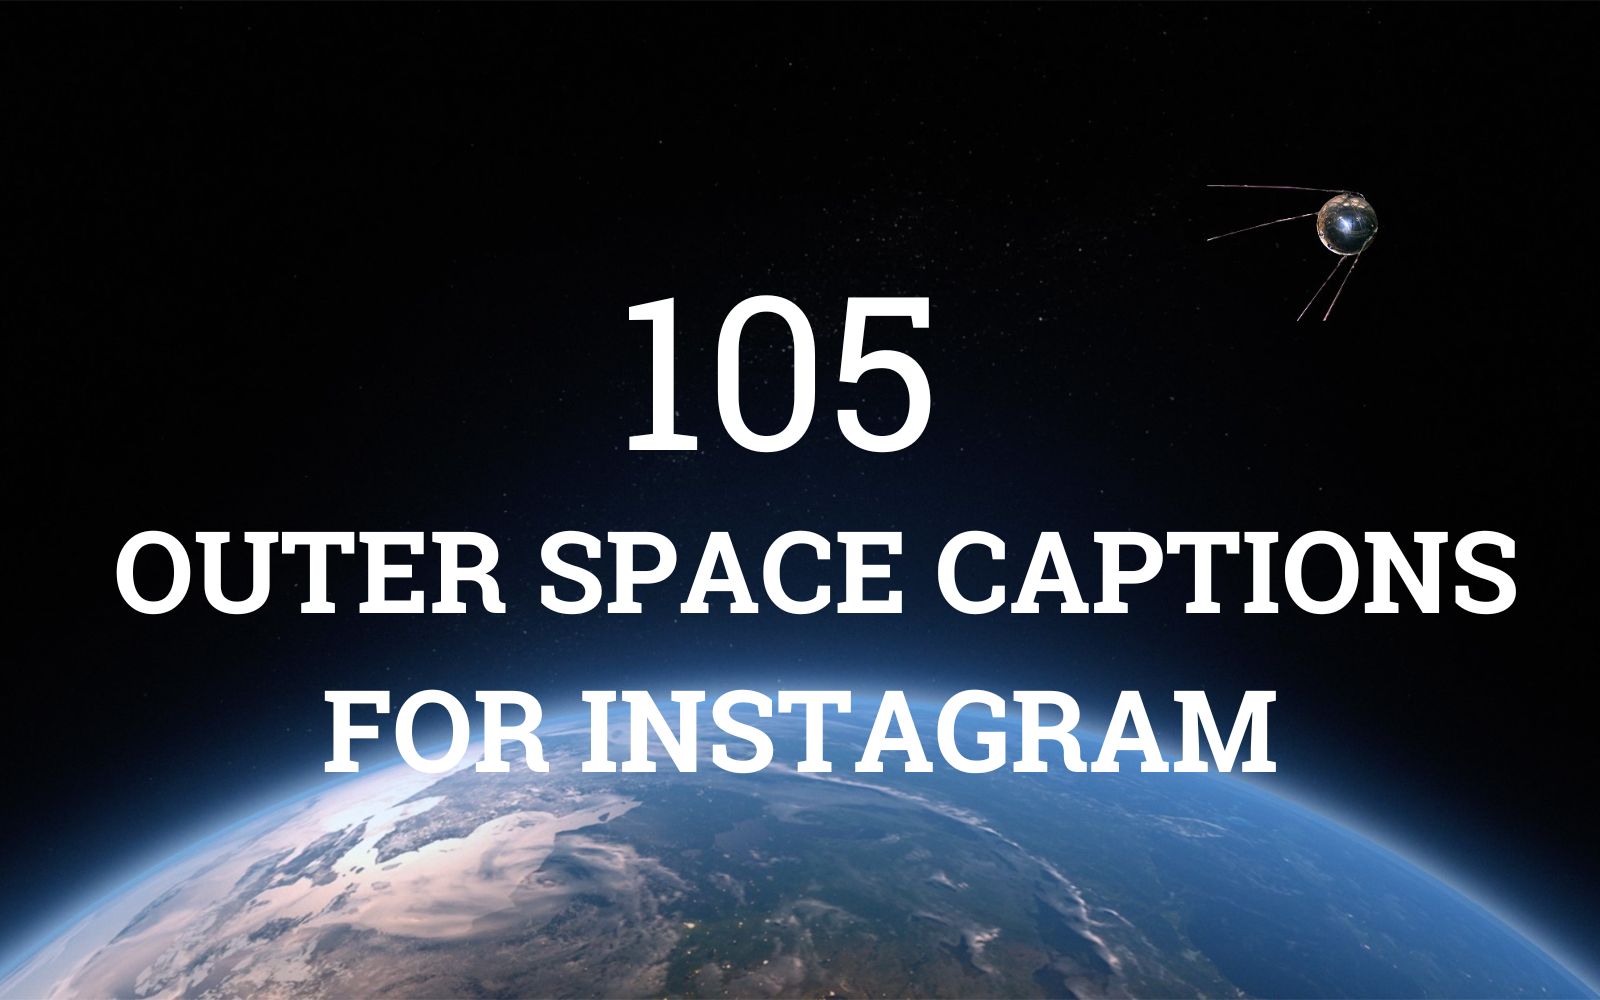 World Space Week Captions for Instagram